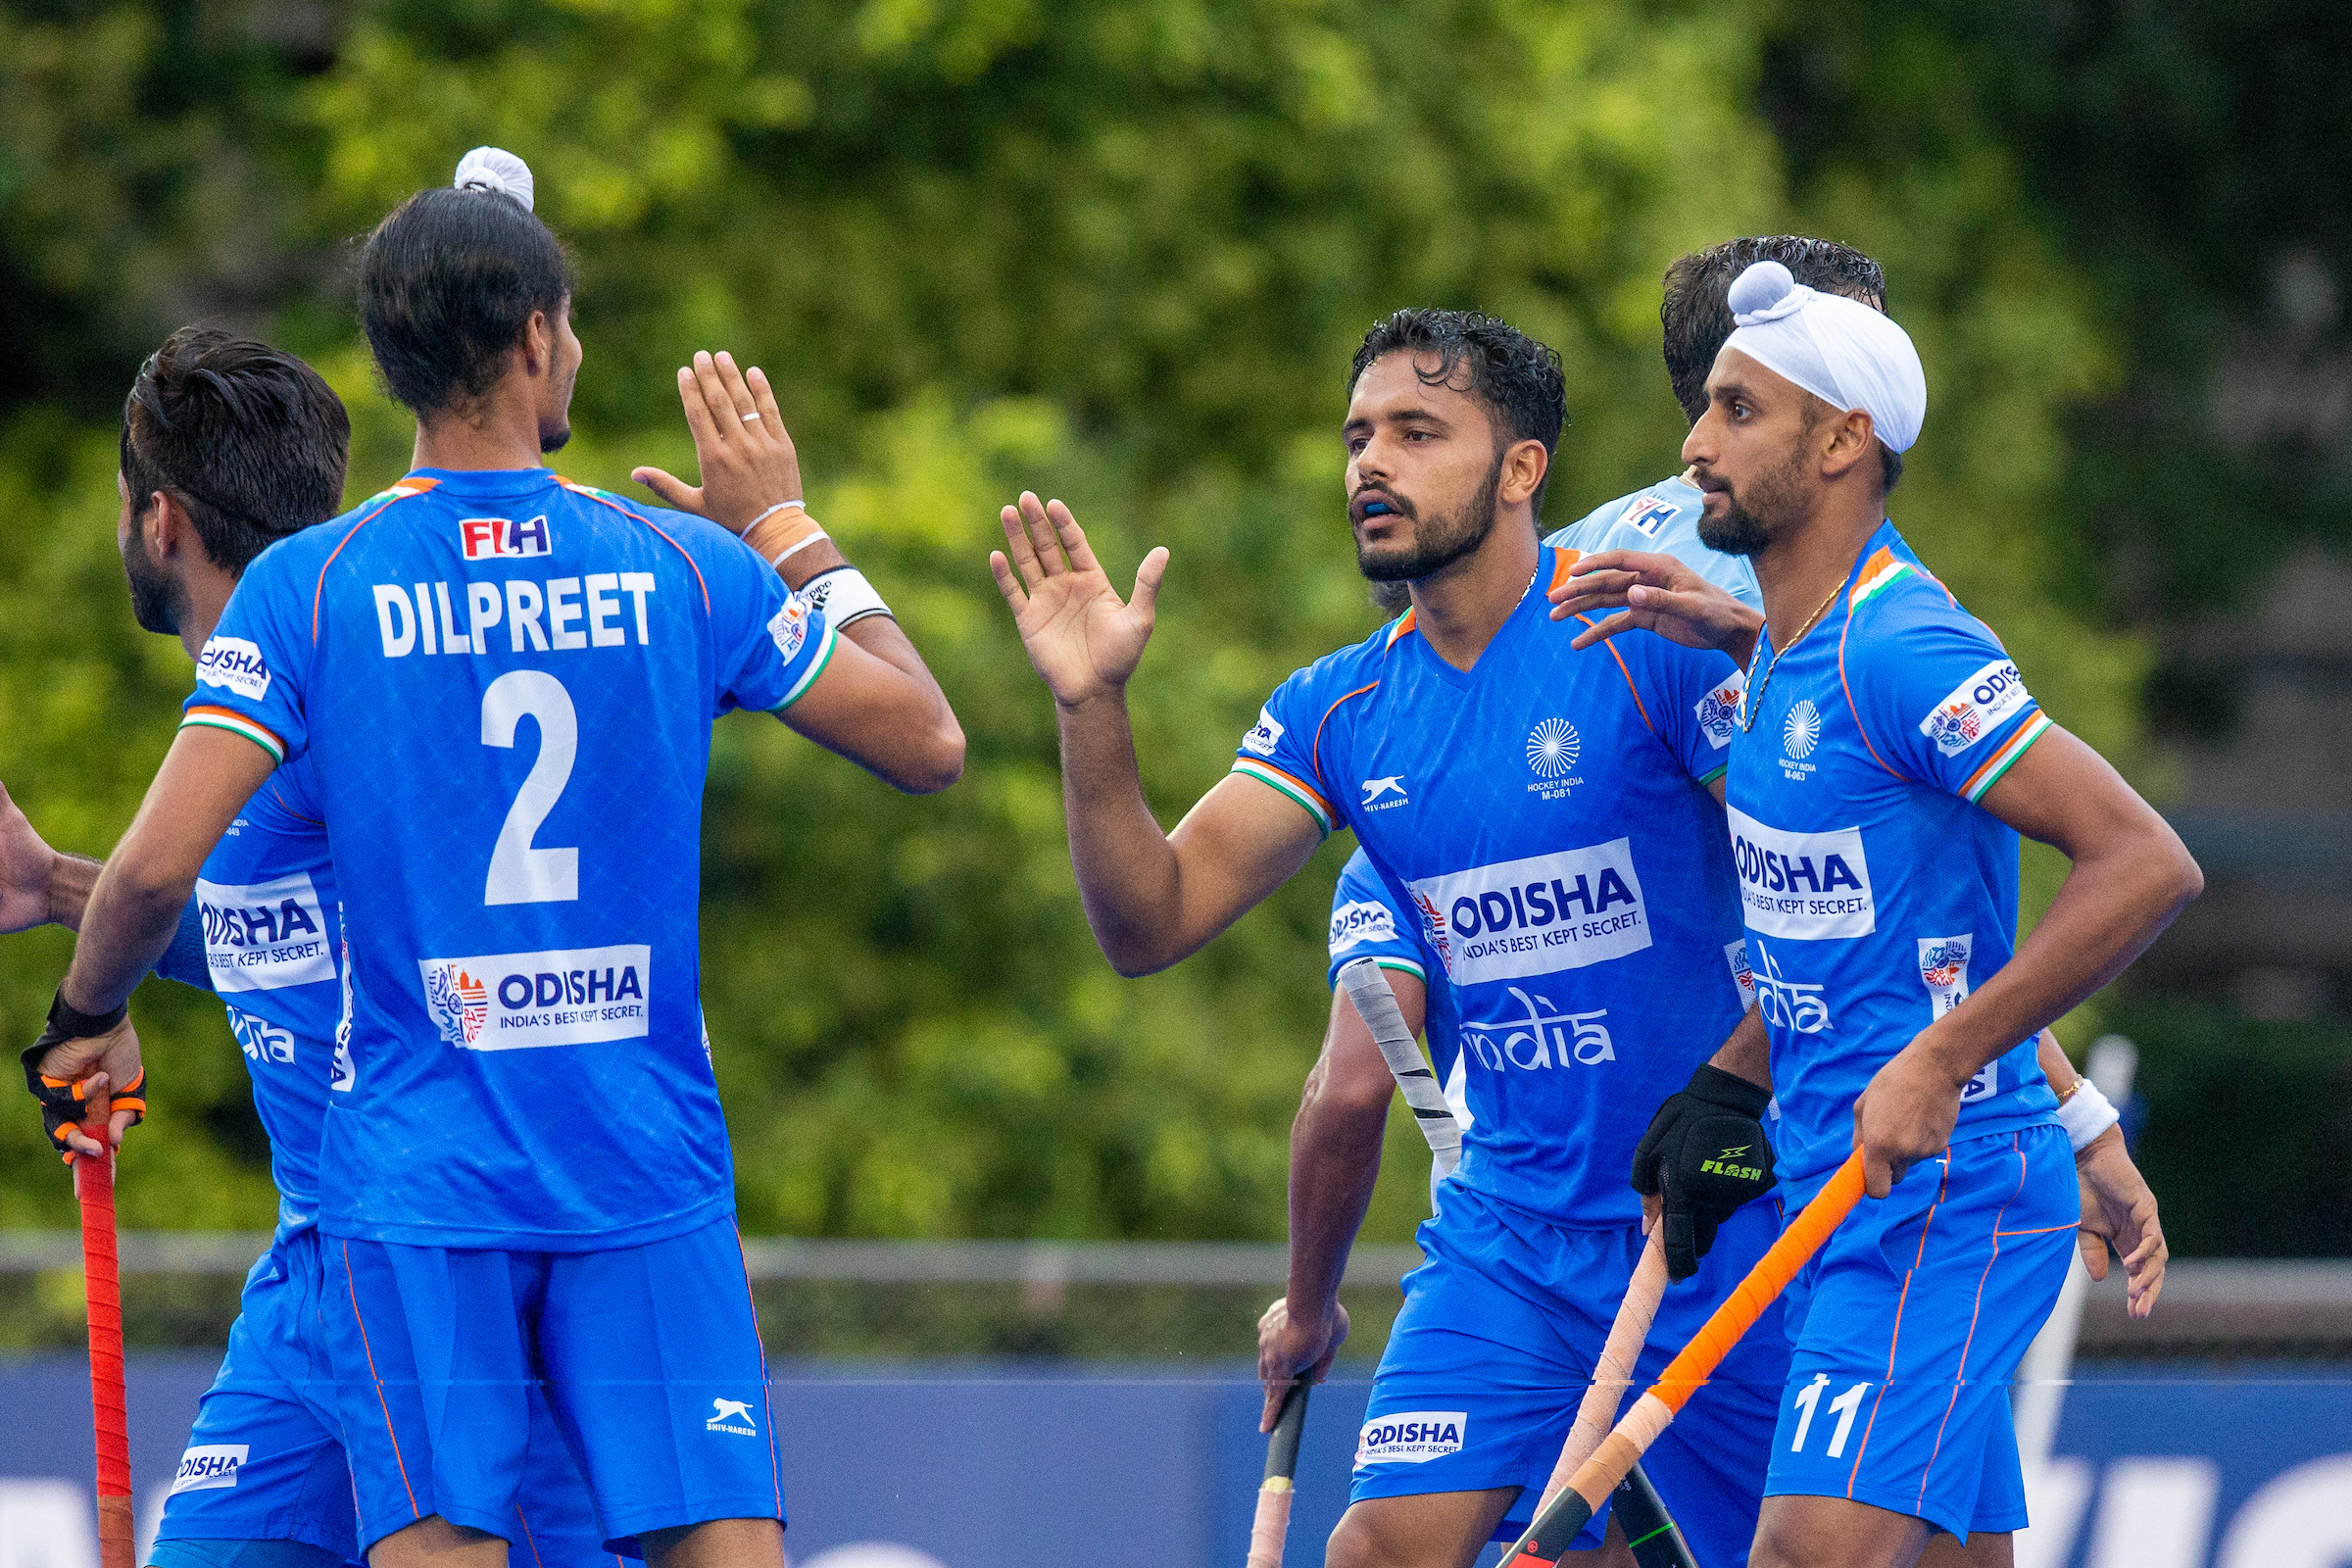 2020 Tokyo Olympics | Indian men's hockey team better prepared to win medal than previous batch, asserts VR Raghunath